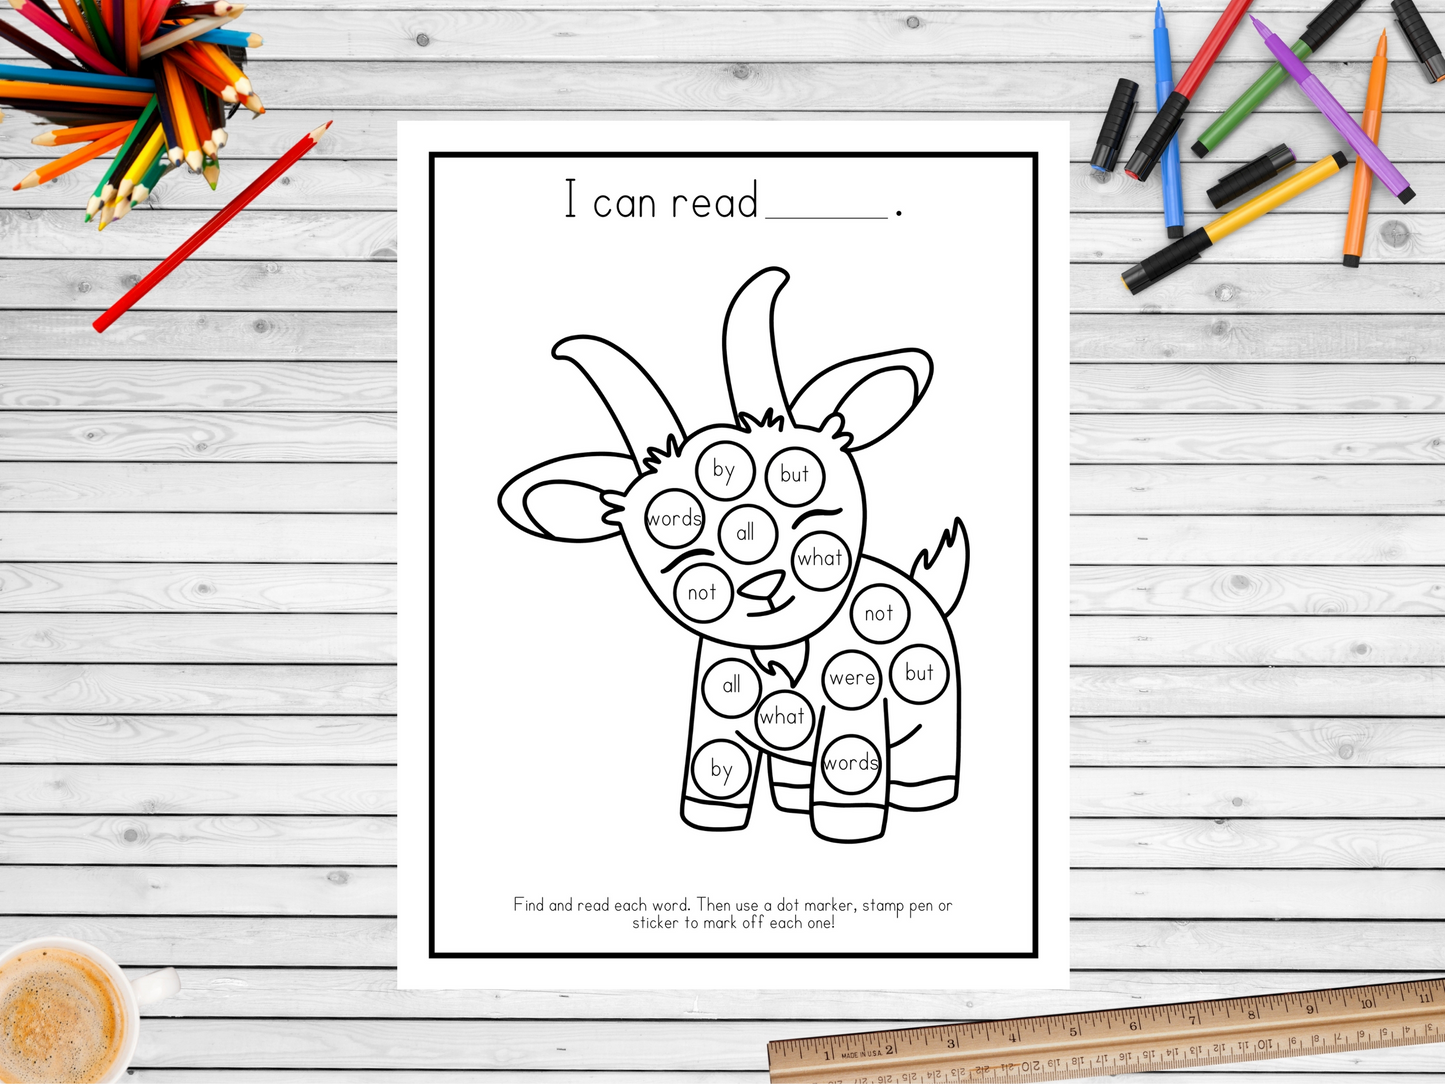 Dot Marker Reading Practice Coloring Pages | First 100 Sight Words